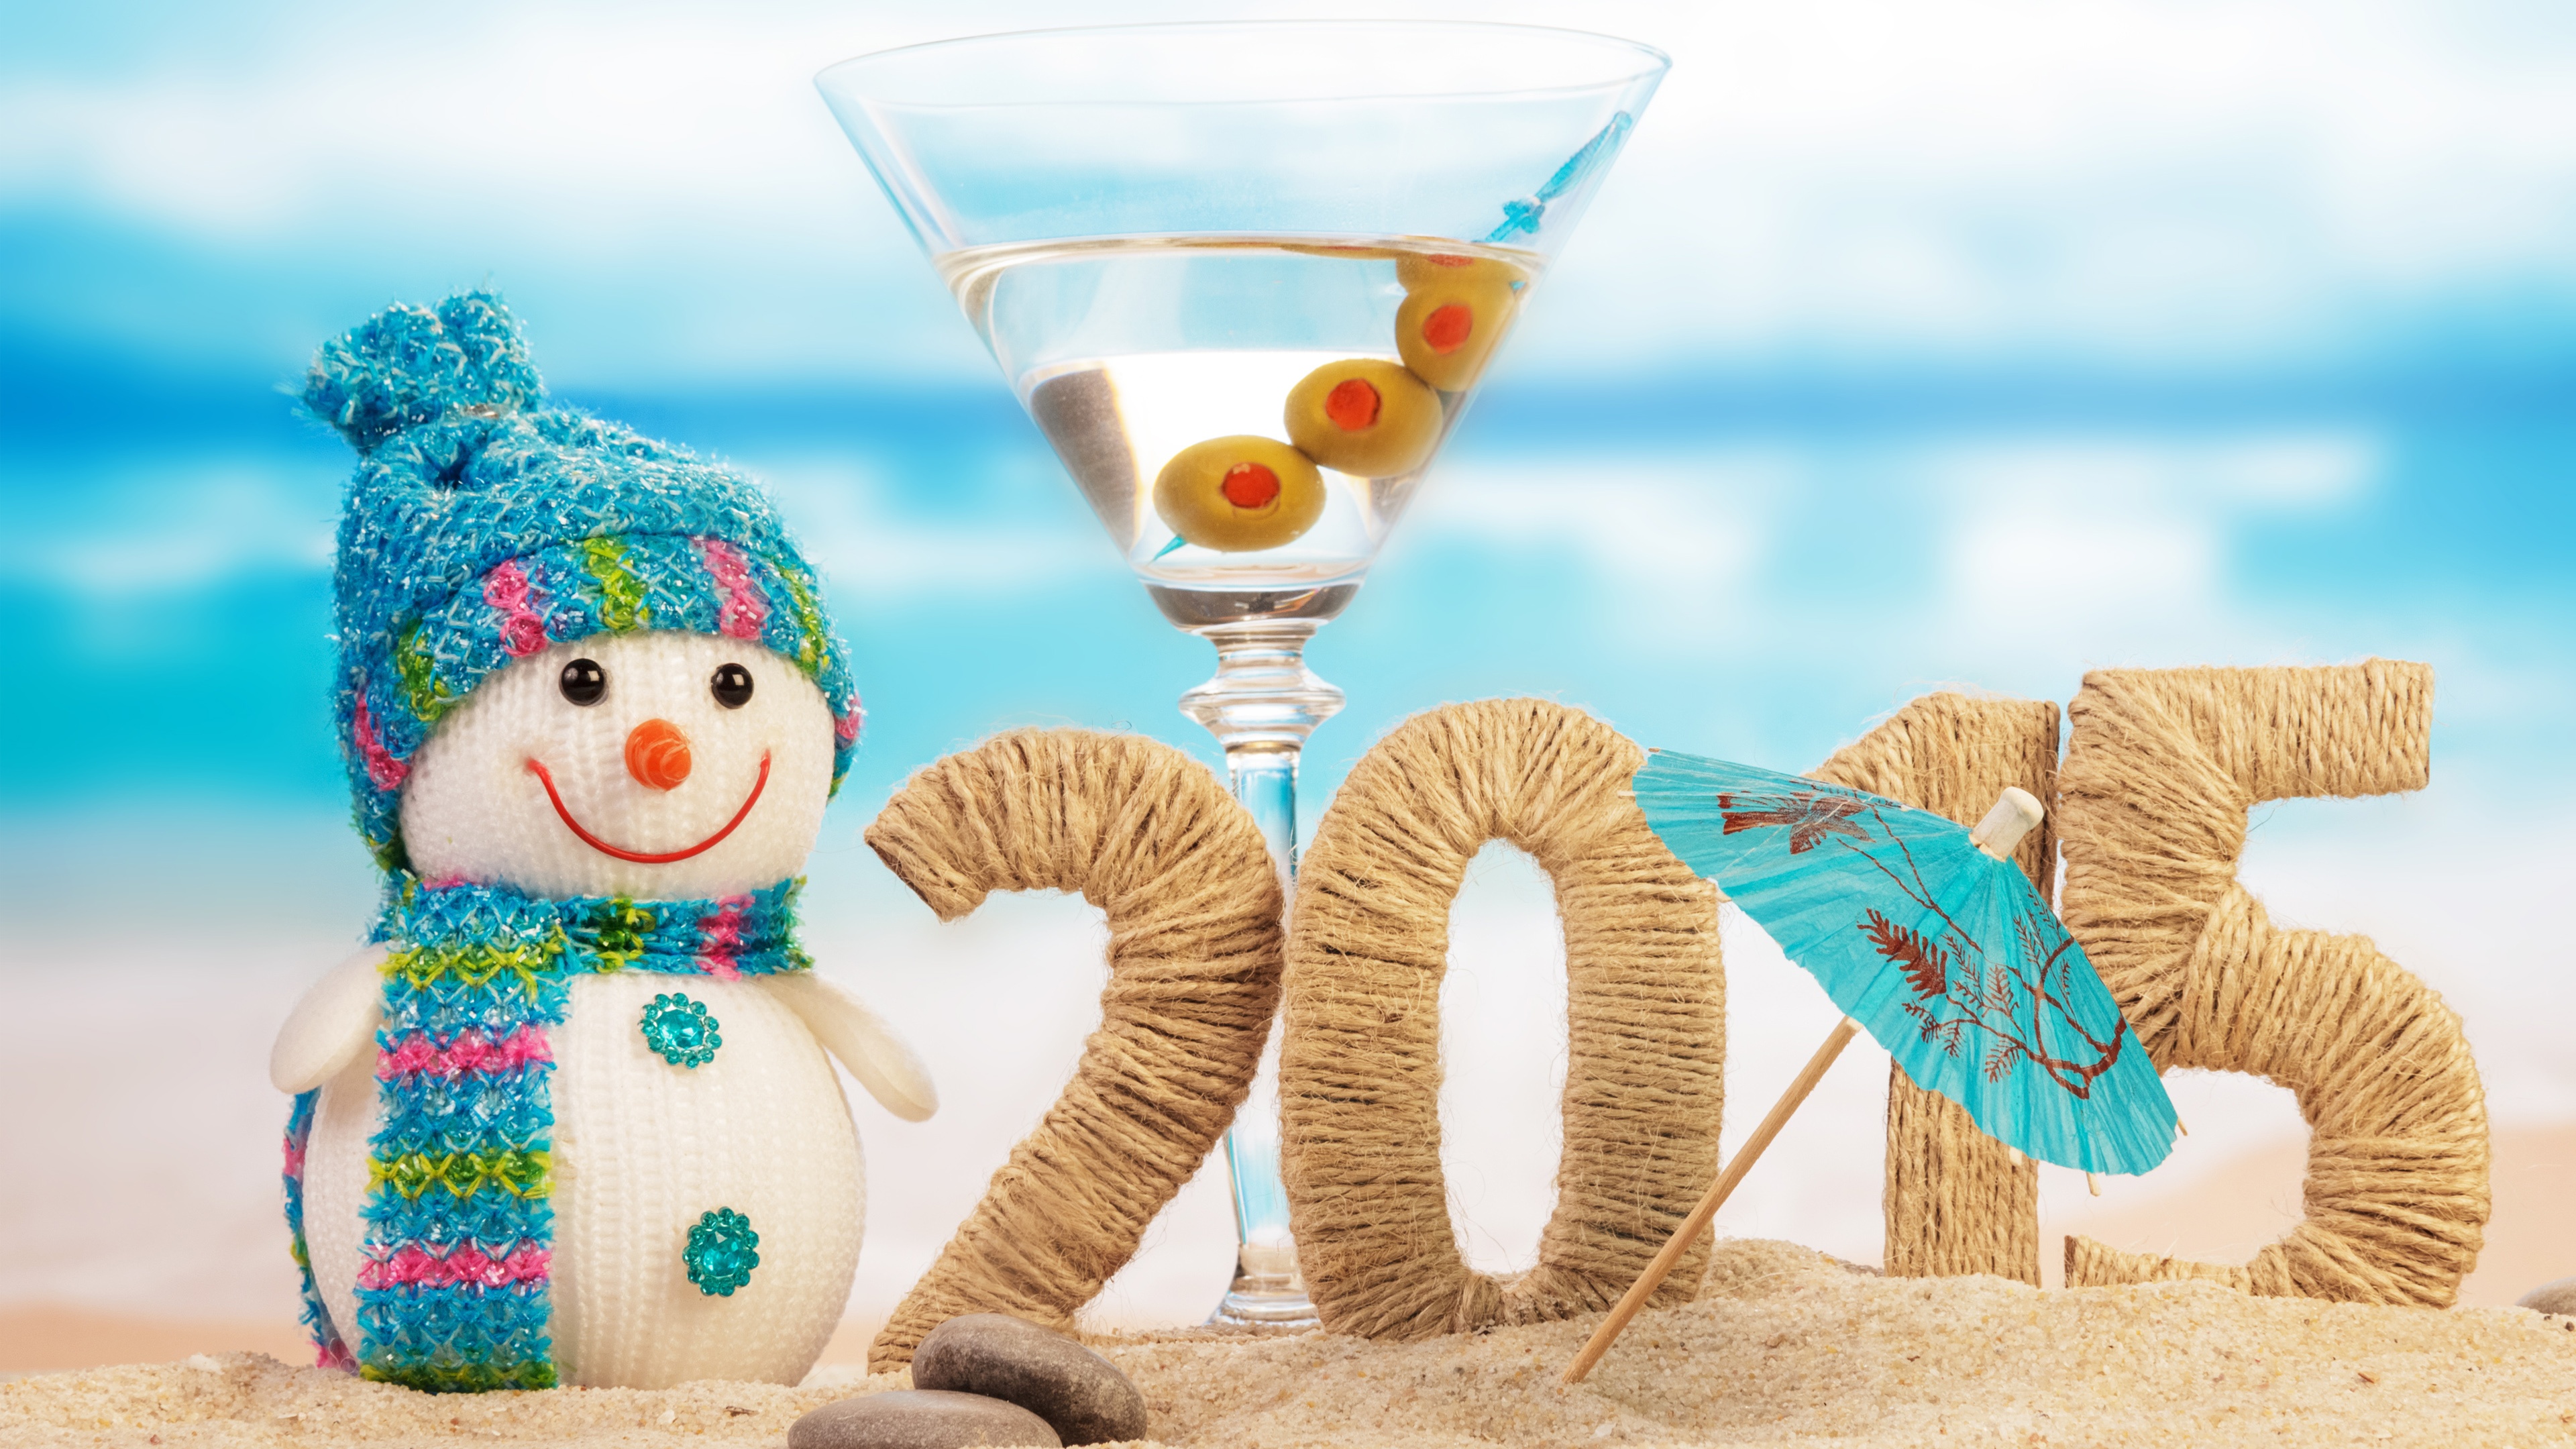 Snowman New Year Holiday Celebration Party 3840x2160